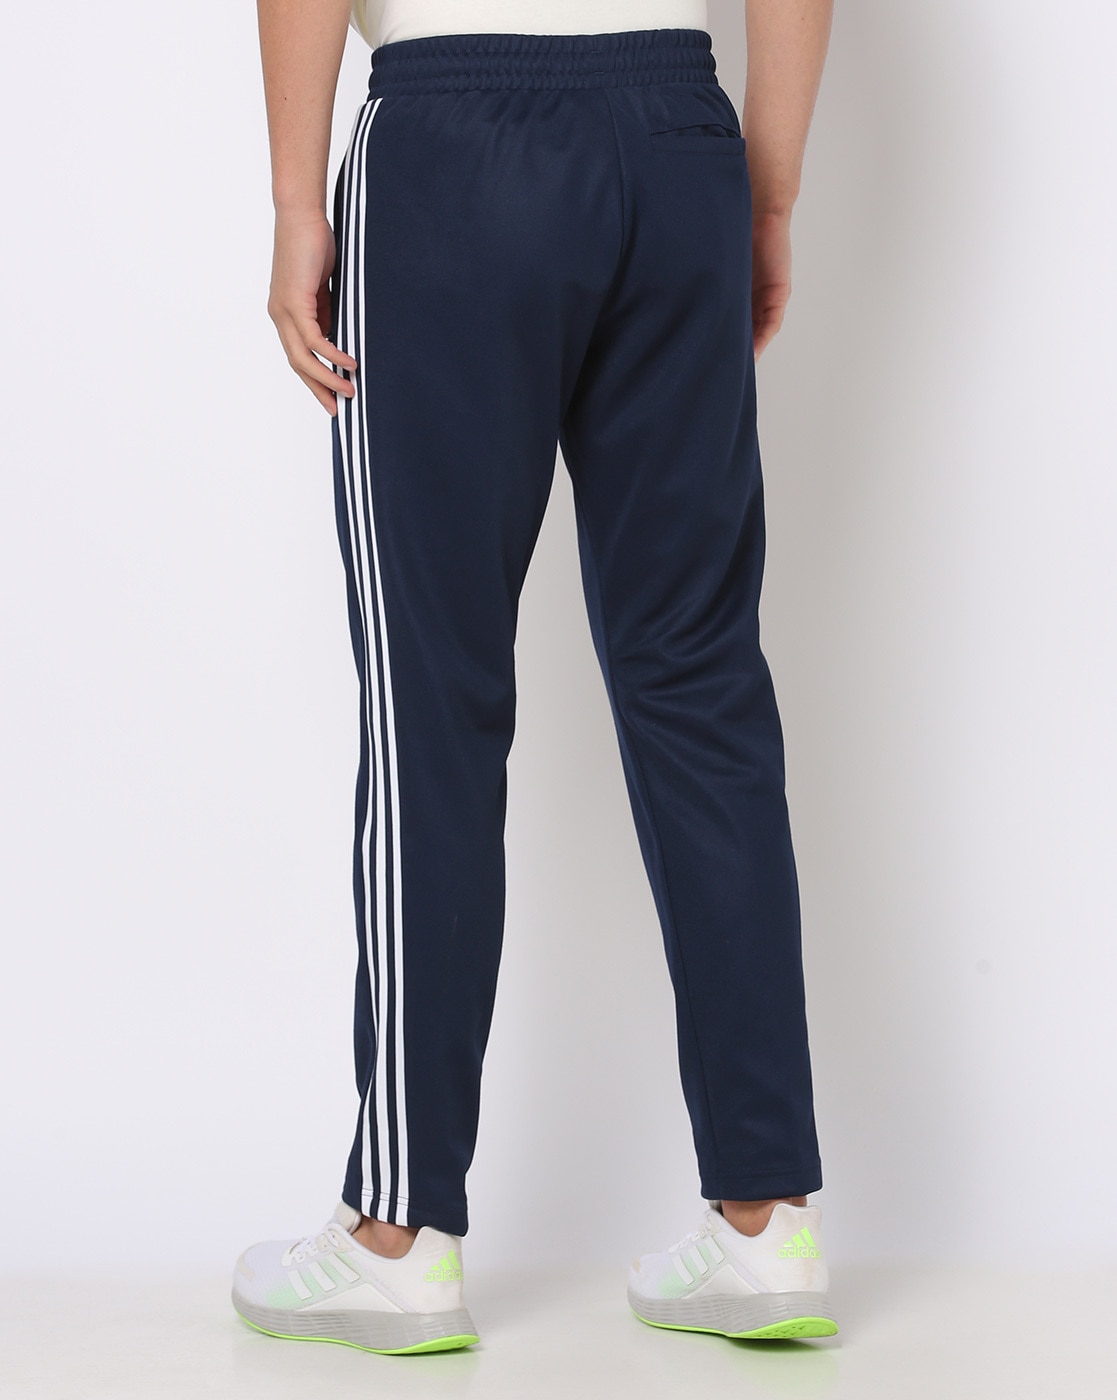 Tee Town Mens Stripes Straight Navy Blue Track Pants